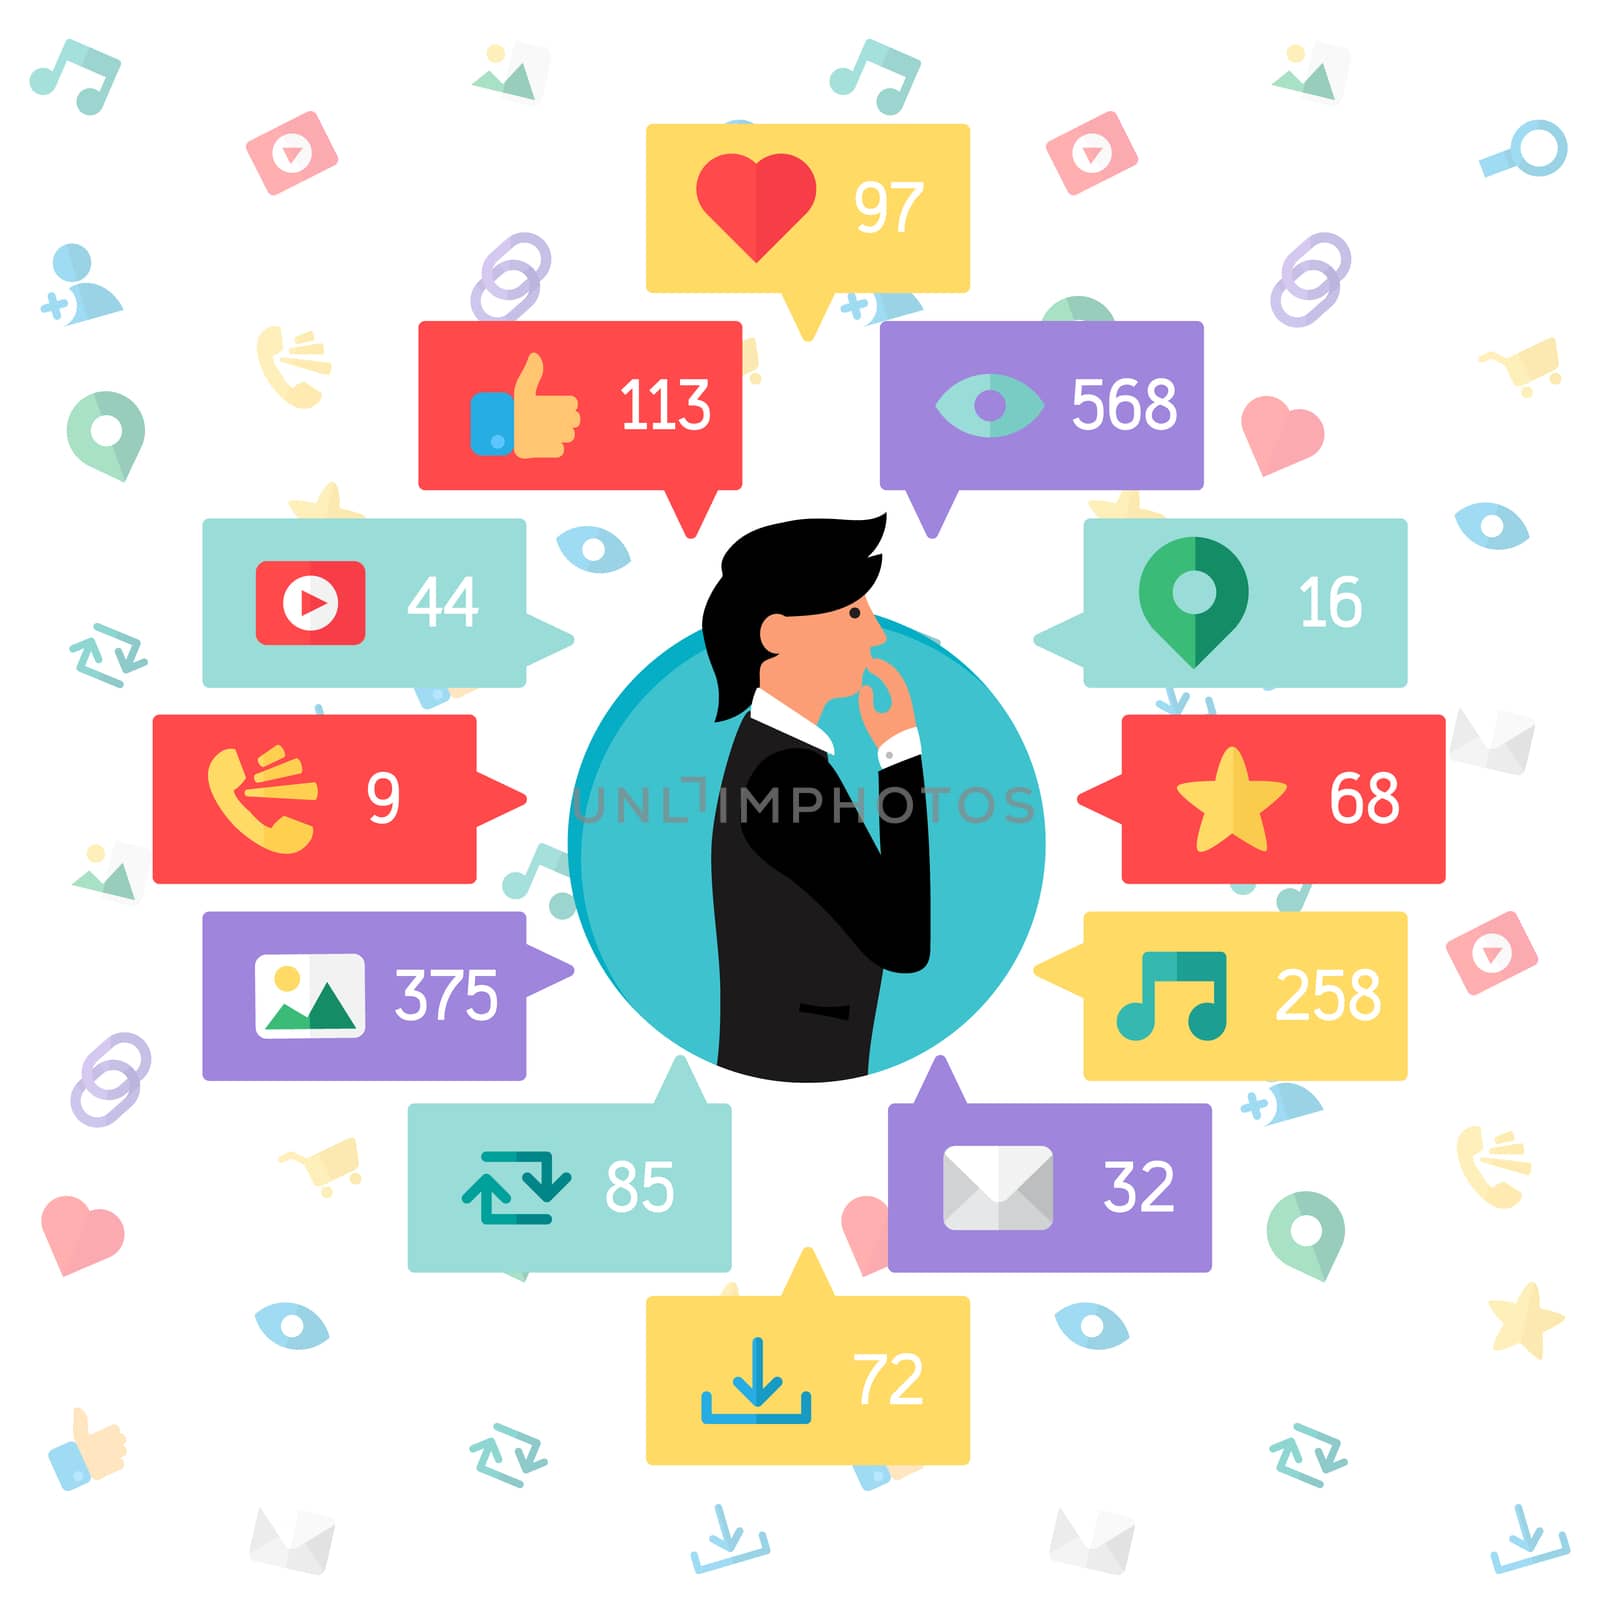 Web Life of Business Man from blog and social networks, online shopping and email, files of video, images and photos. You can change figures in bubbles - count of views, likes and reposts. Vector